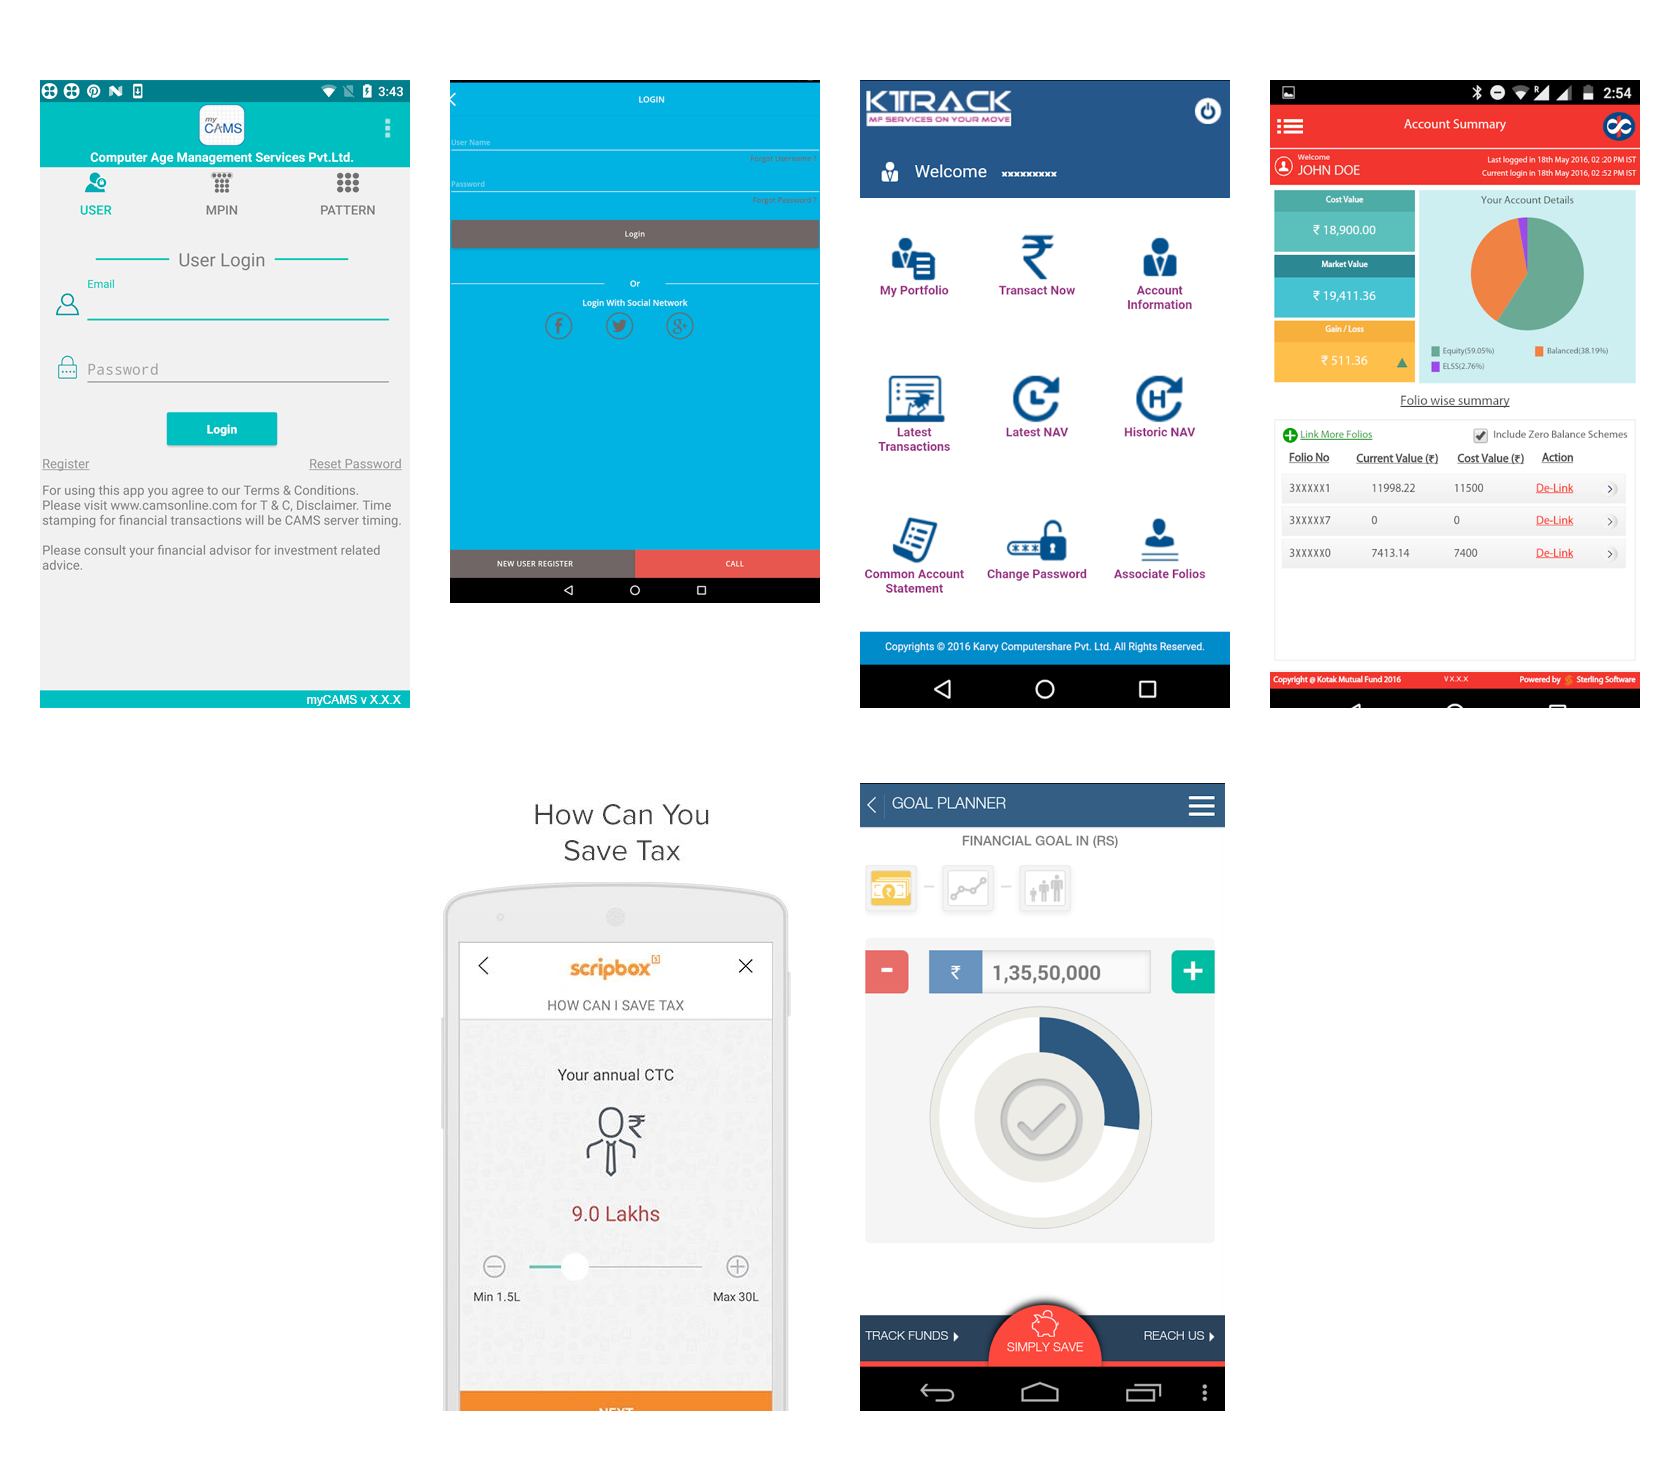 financial app design trends are improving slowly